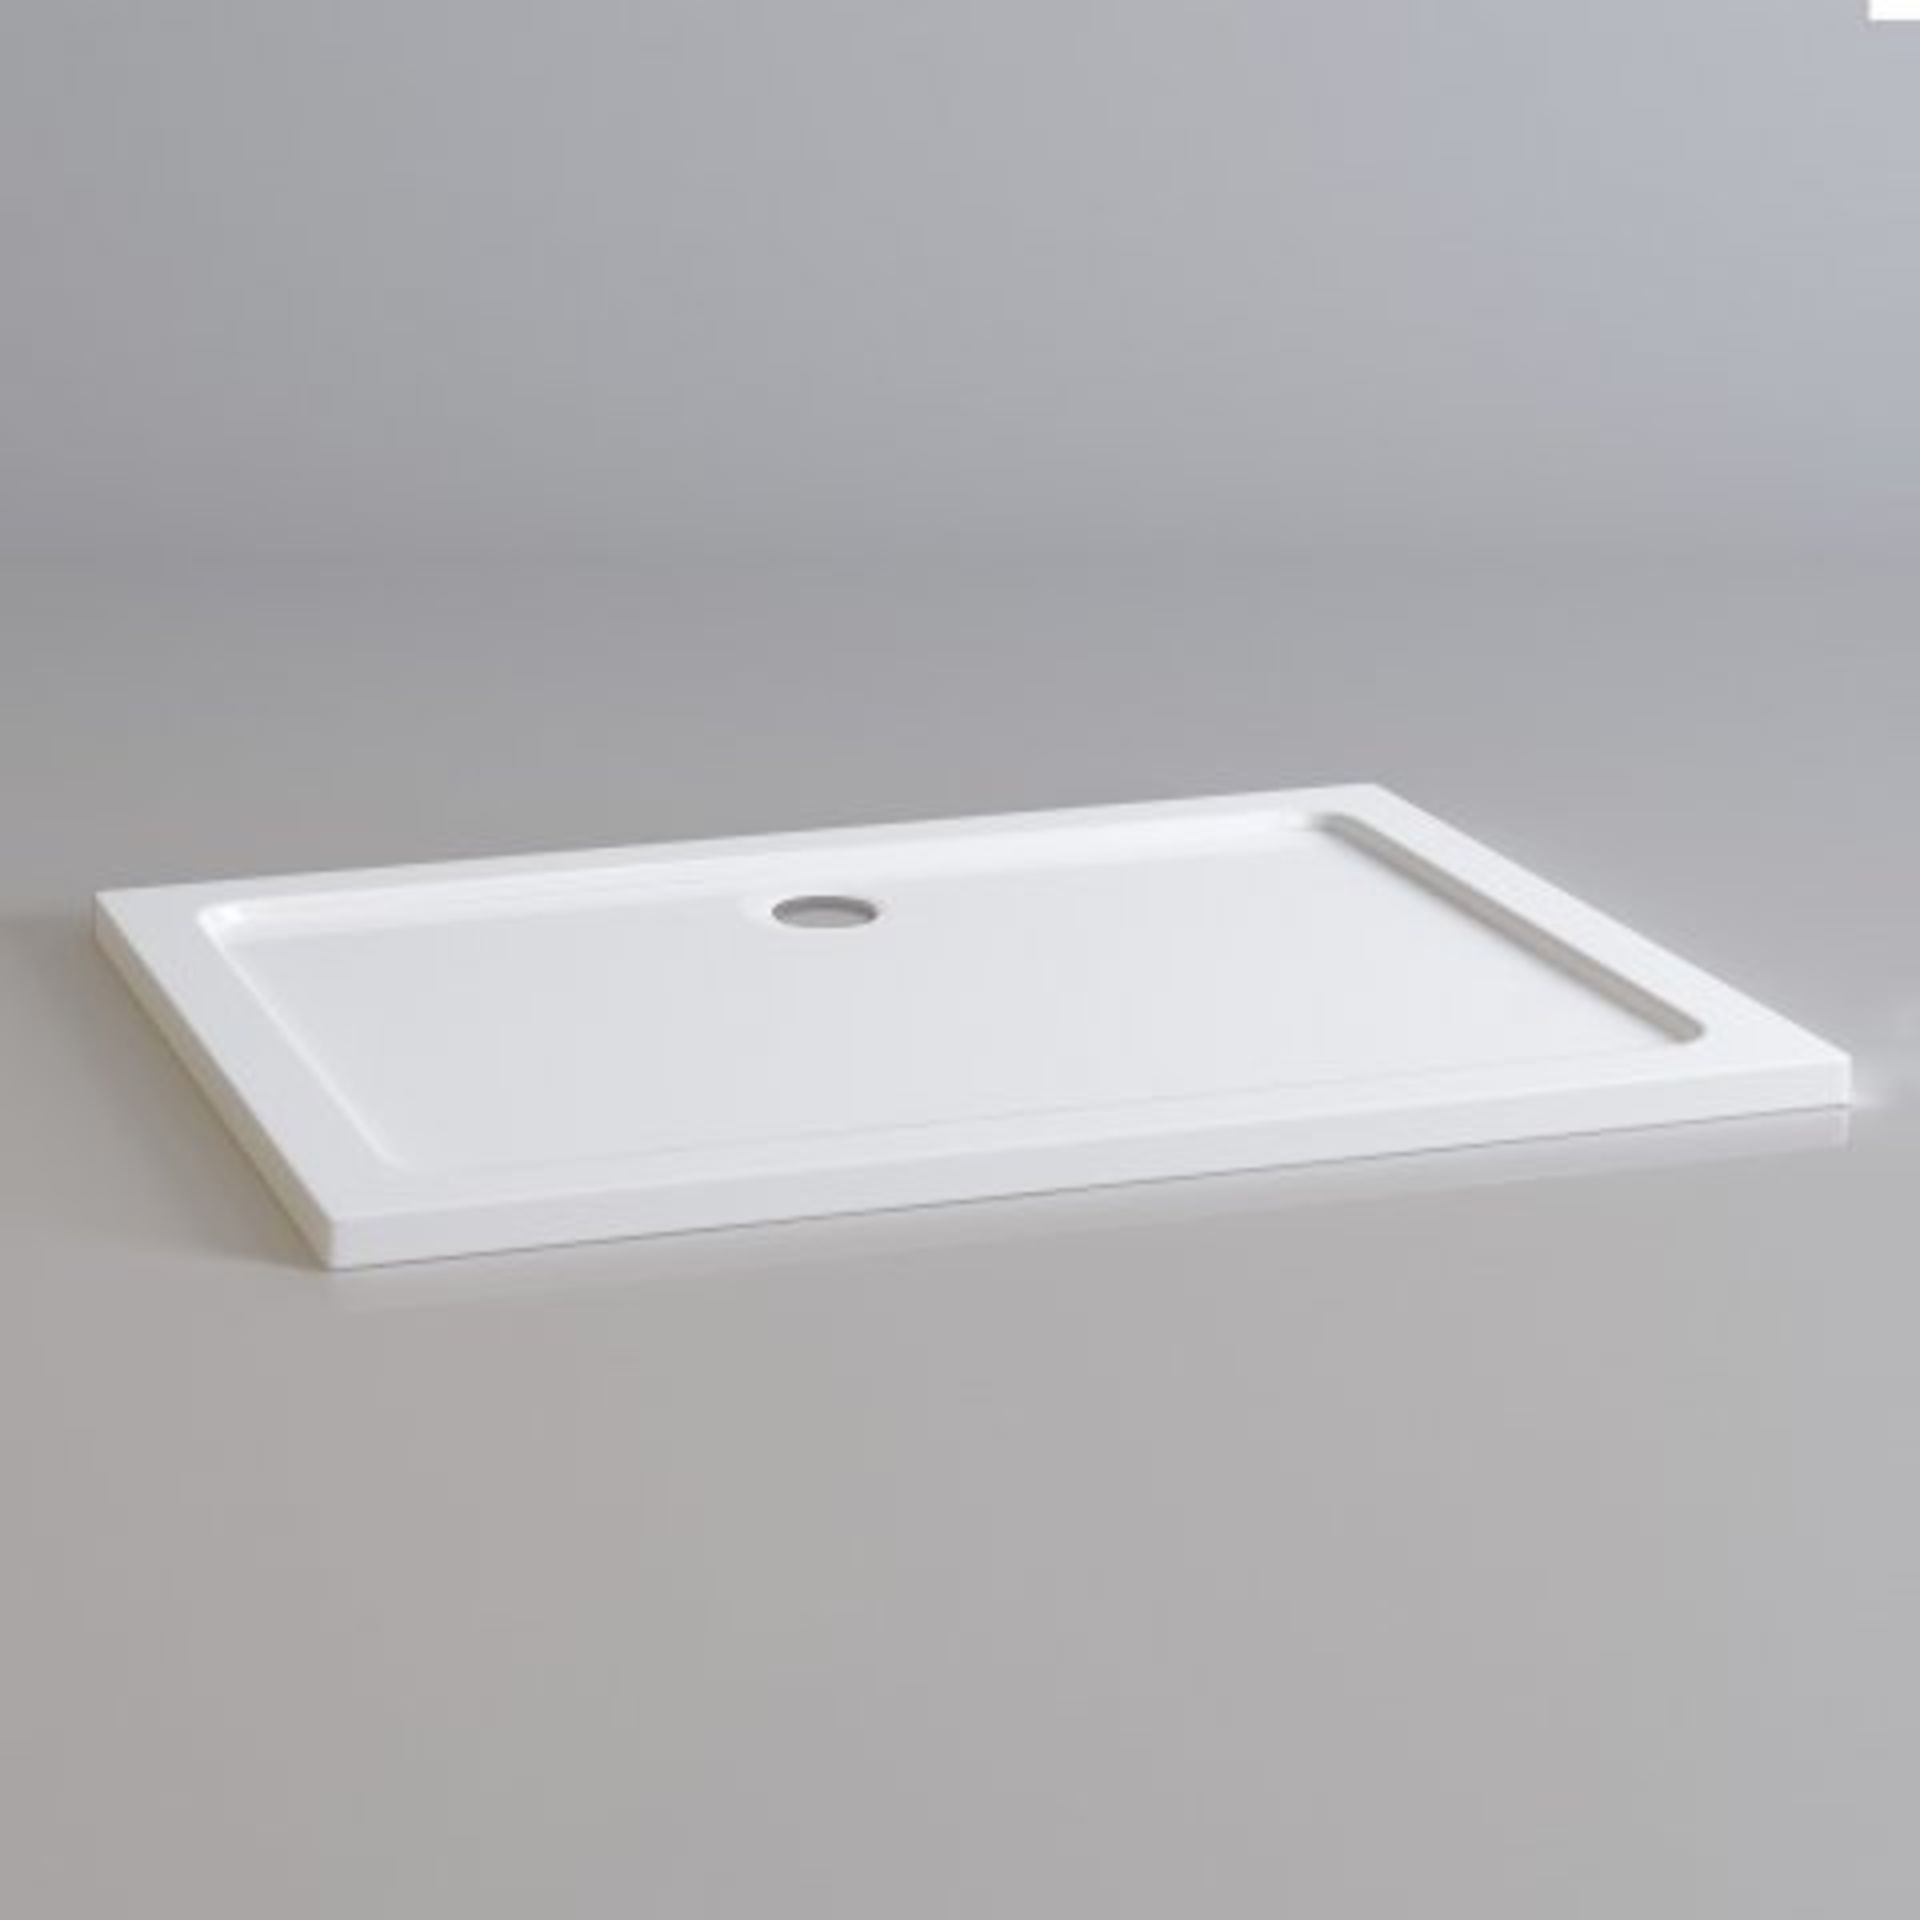 (O69) 1200x900mm Rectangular Ultra Slim Stone Shower Tray. RRP £299.99. Our brilliant white trays